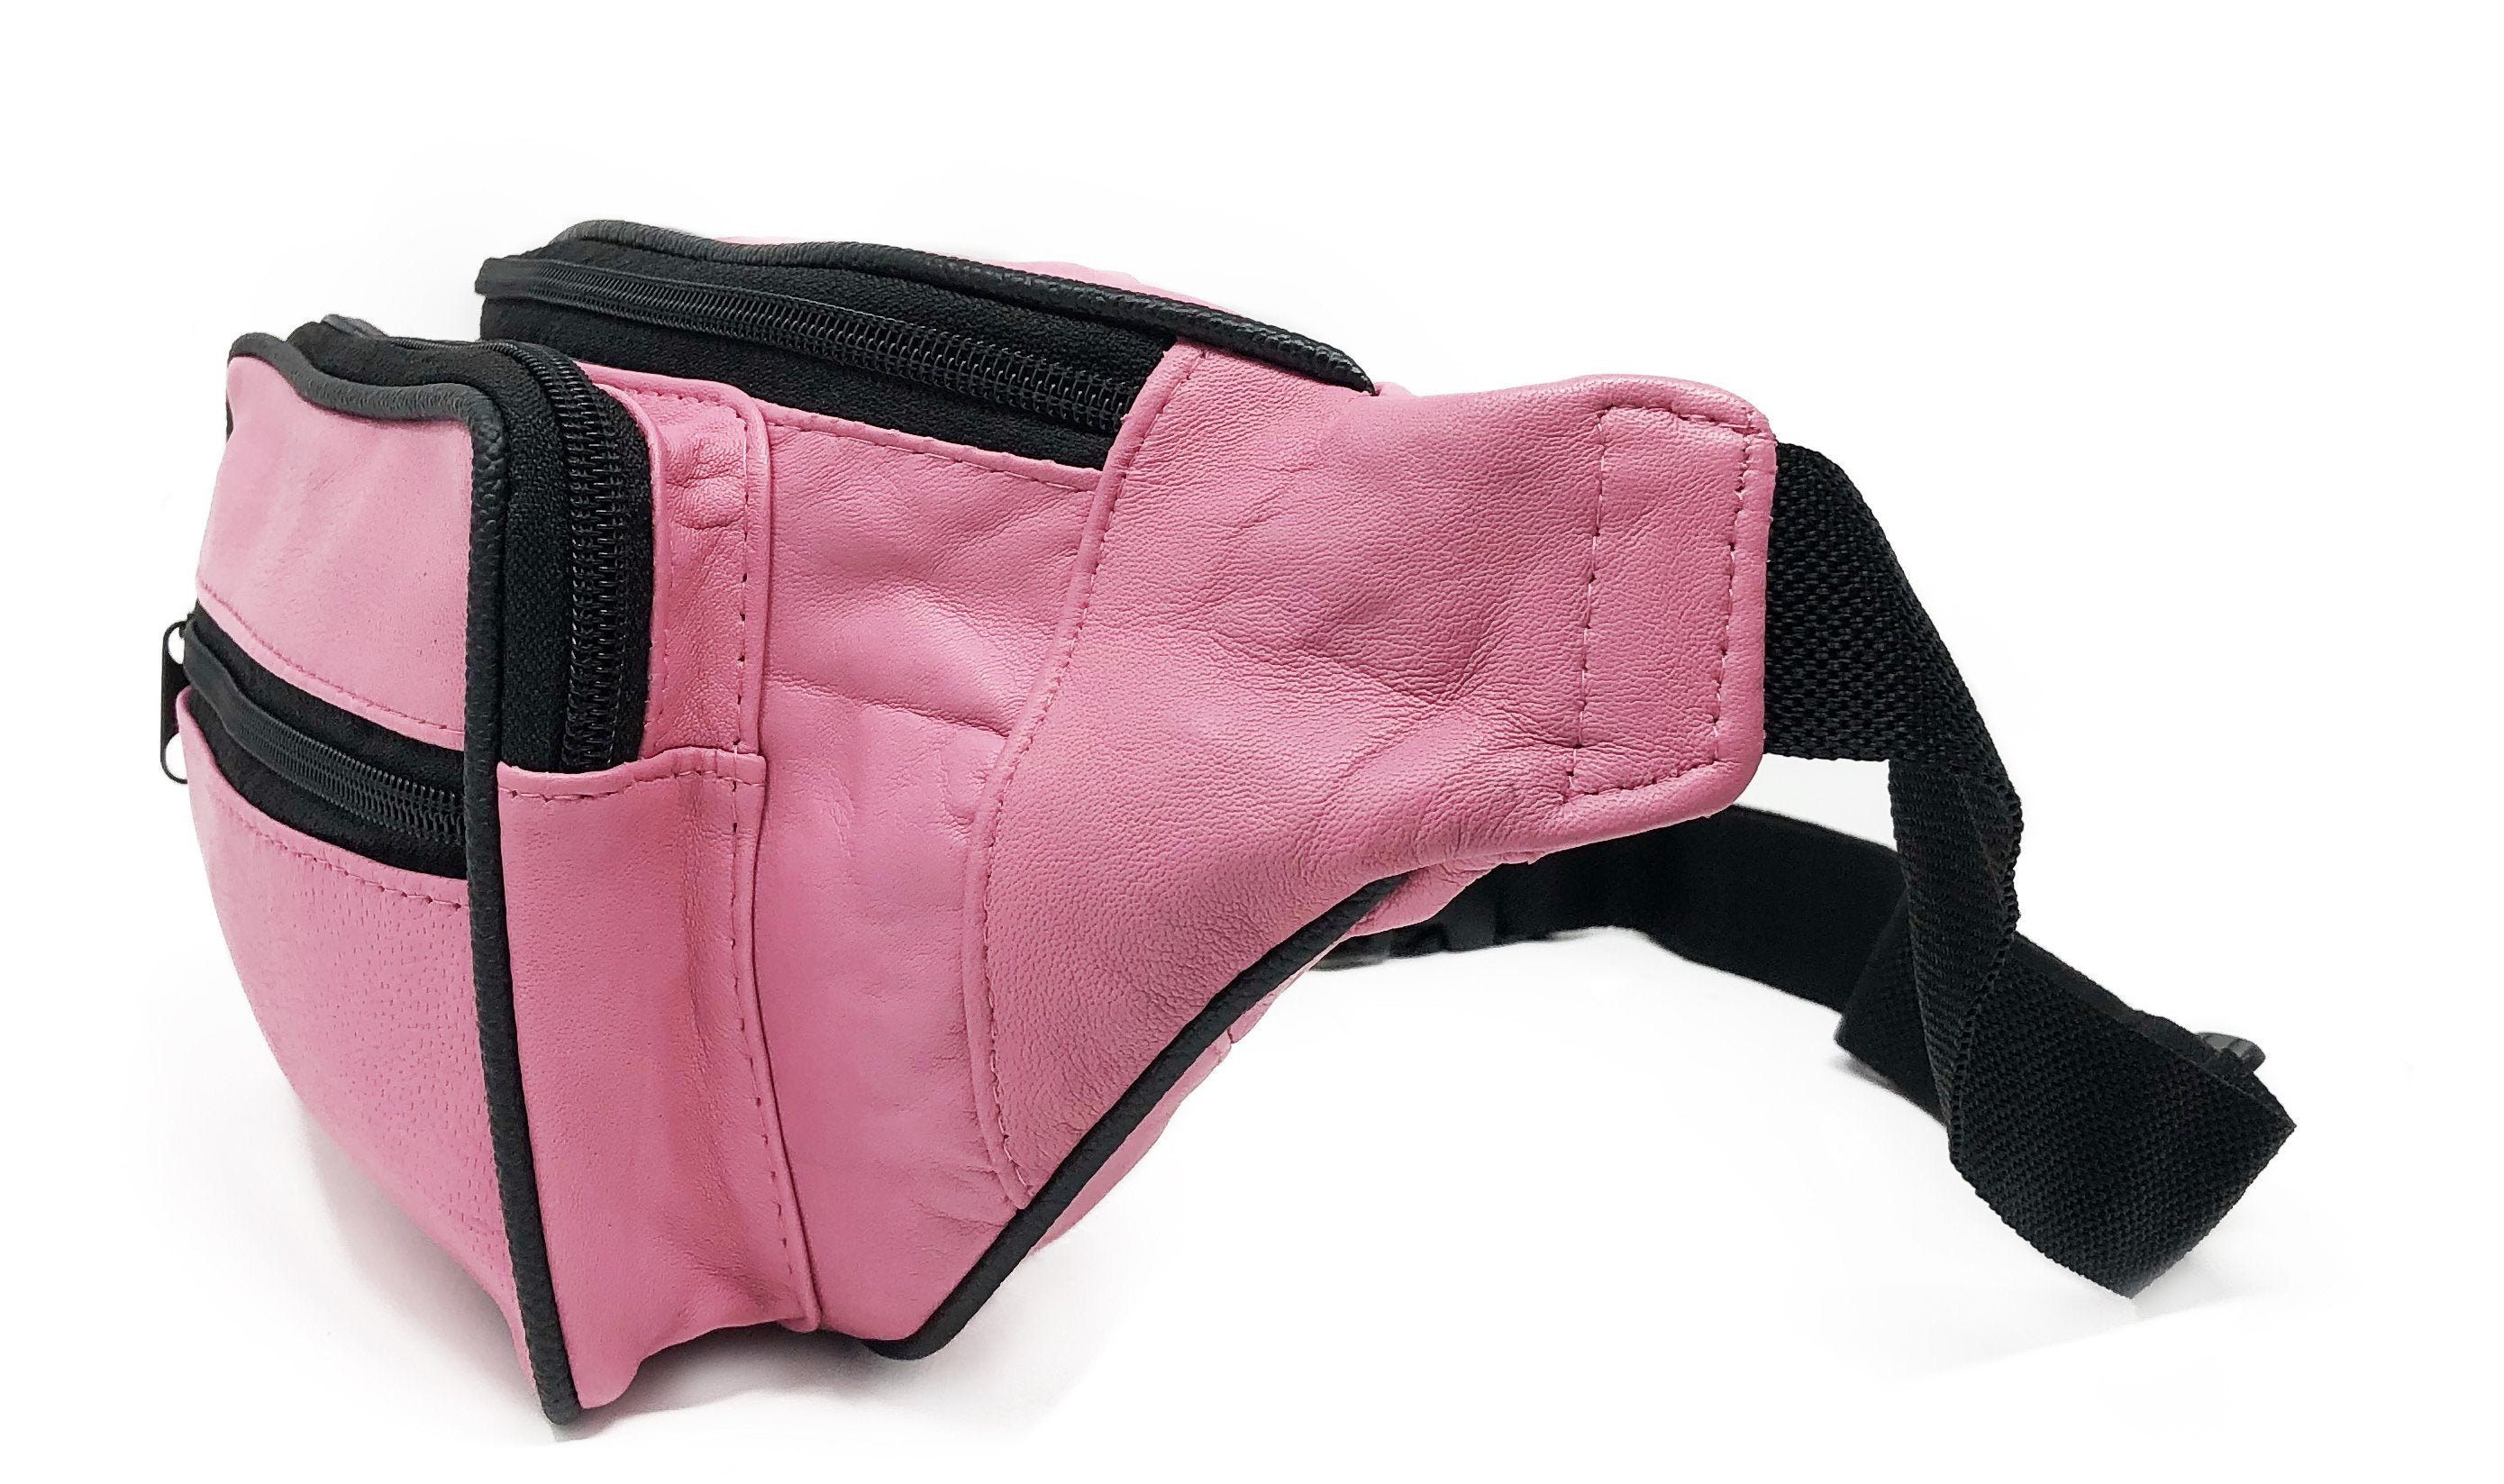 AFONiE Colorful Leather Waist Pouch